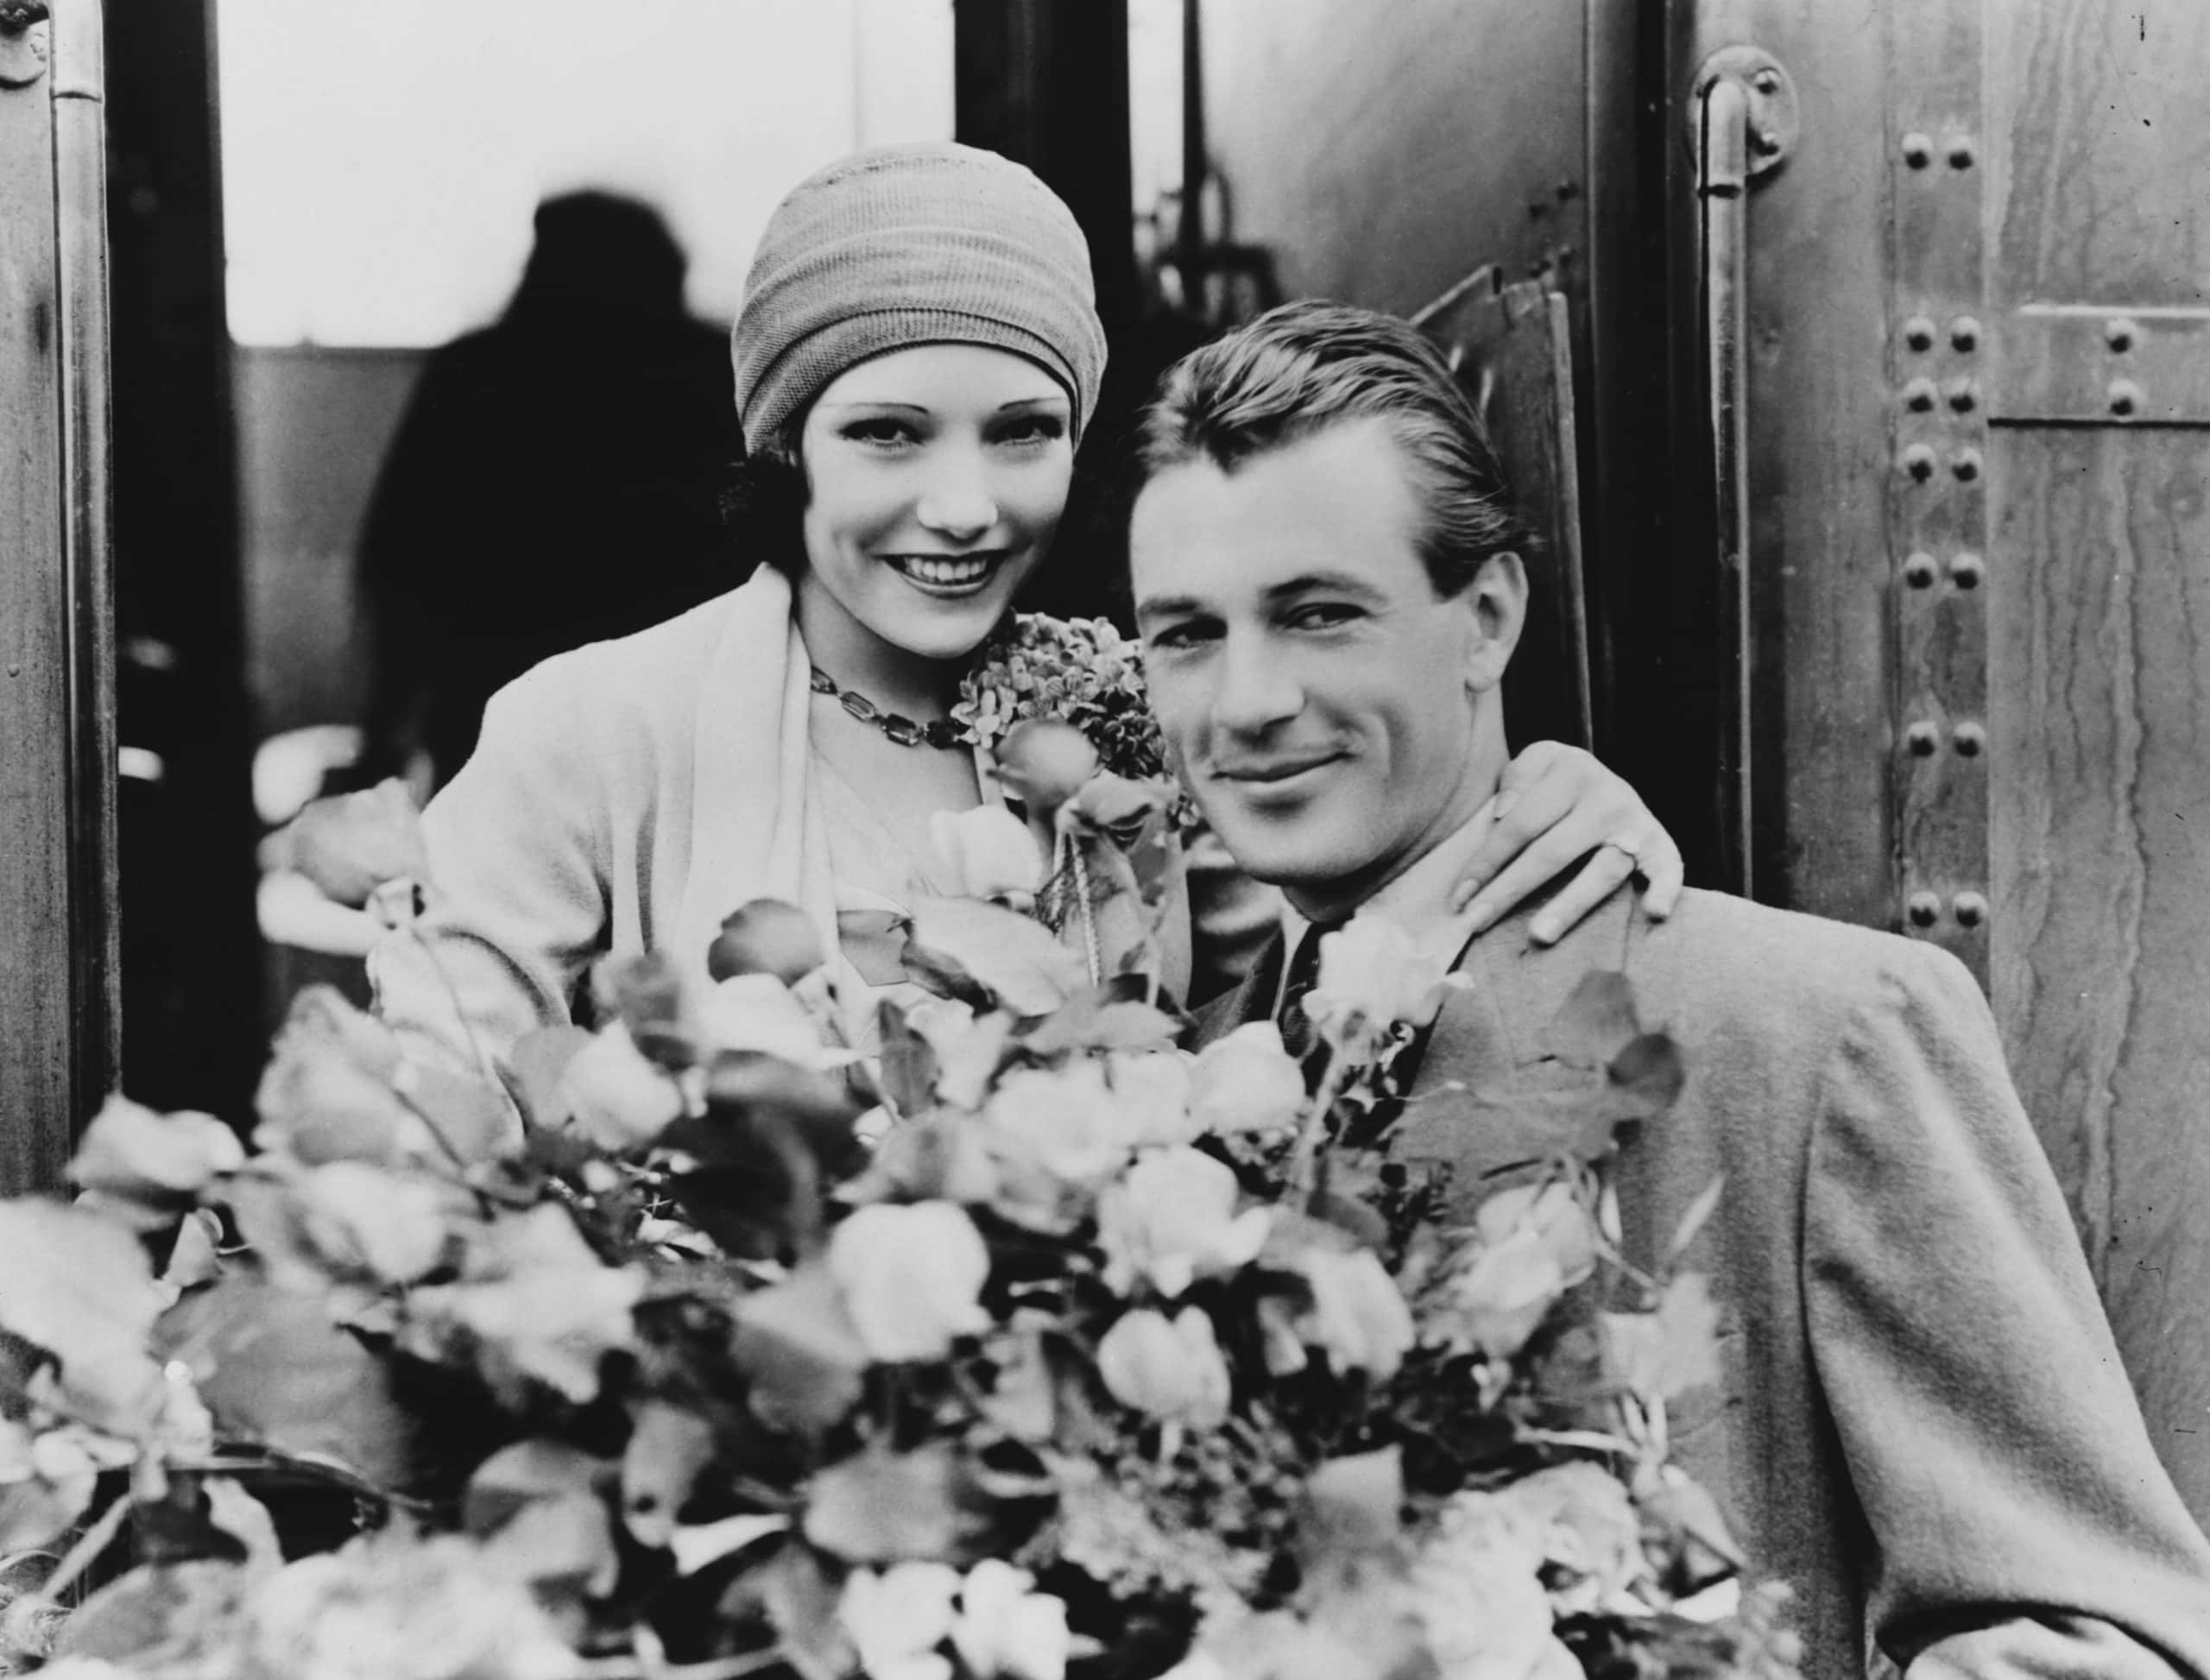 Gary Cooper facts